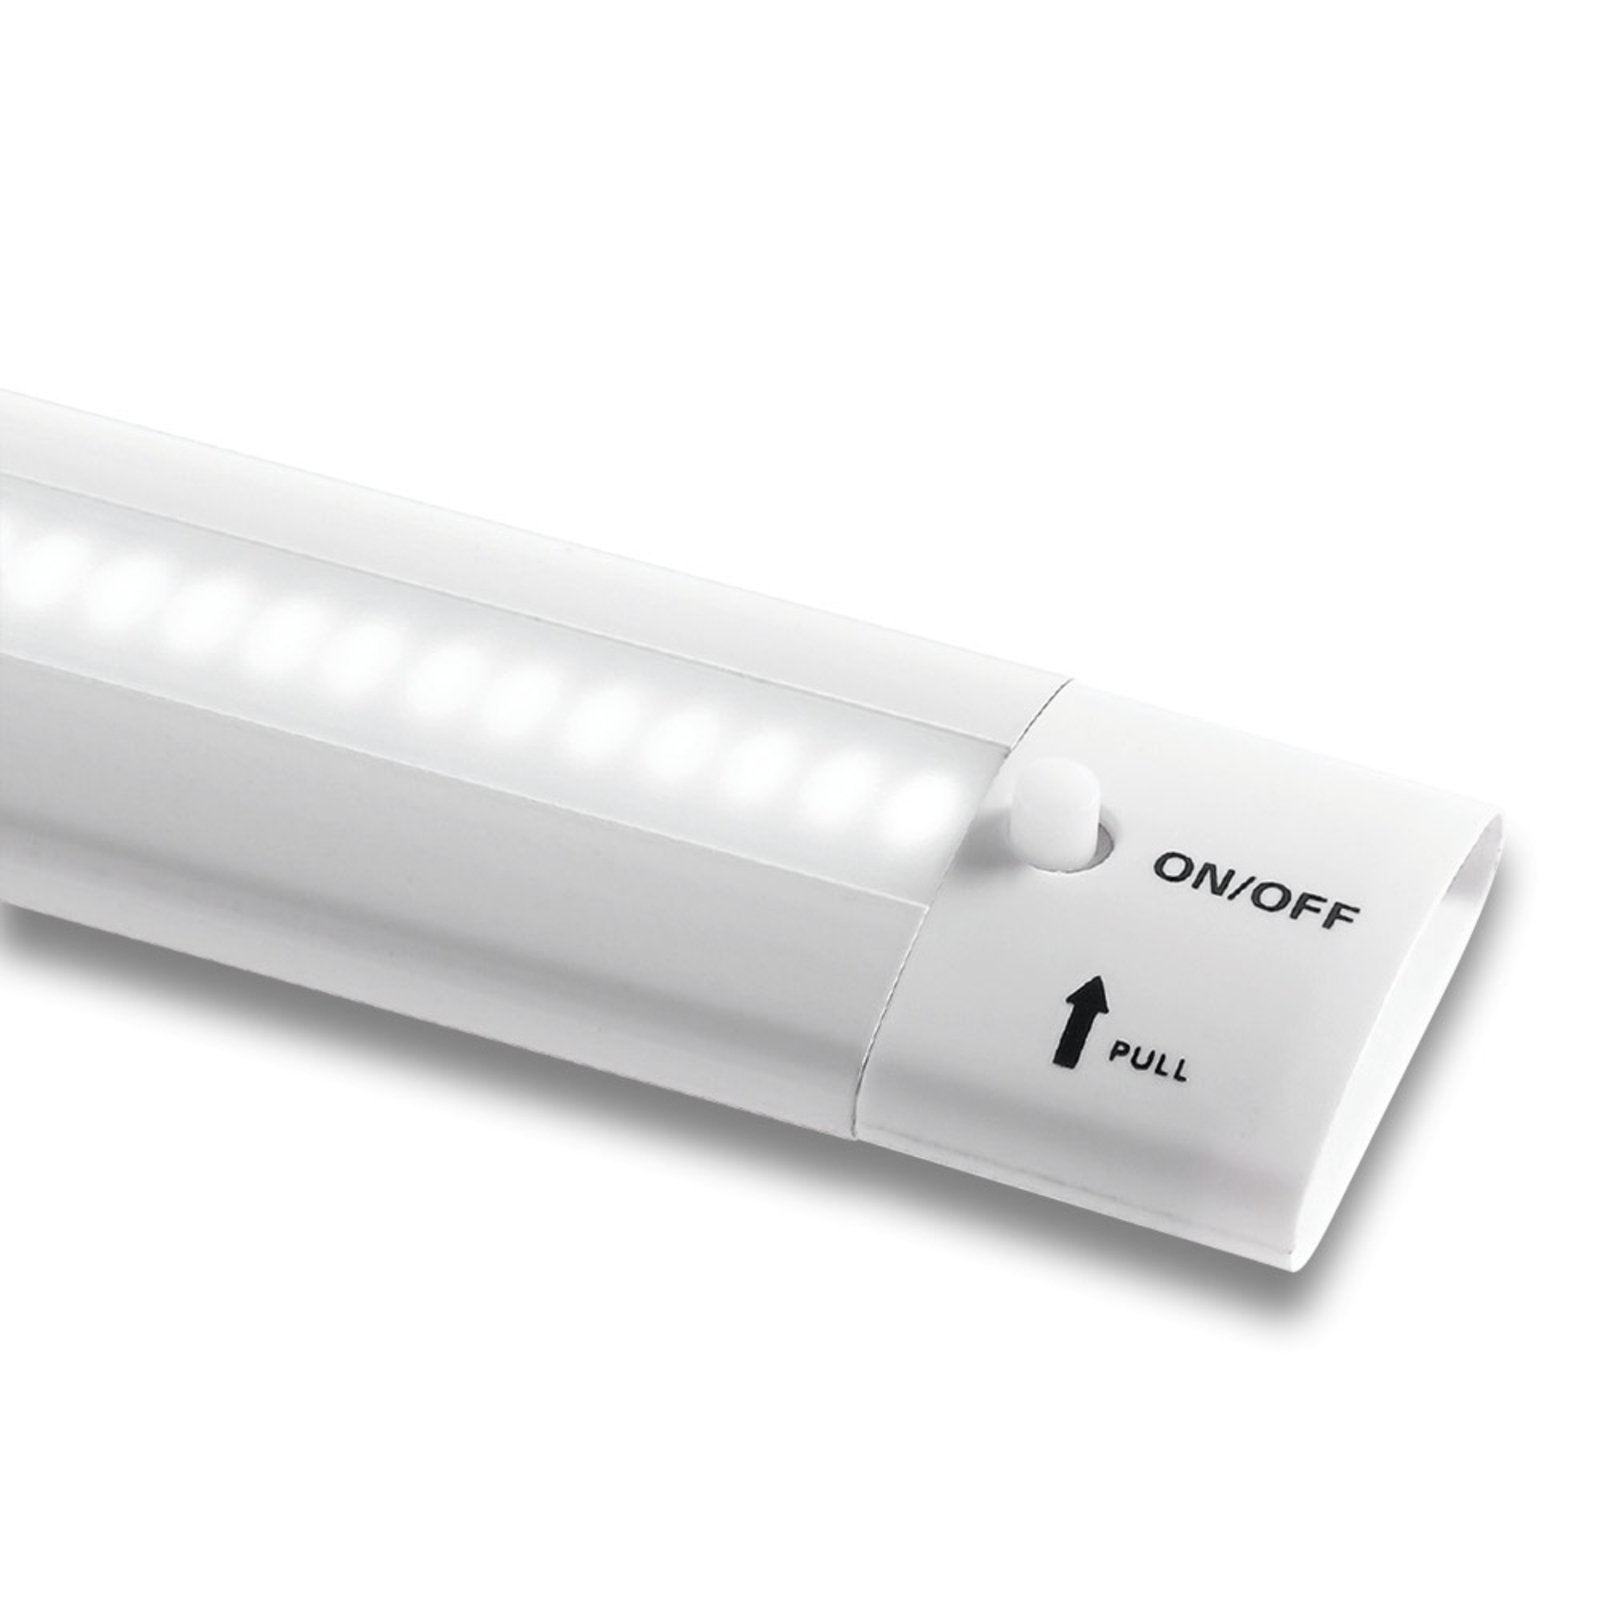 Lampada sottopensile LED 16W Galway 6690, bianco